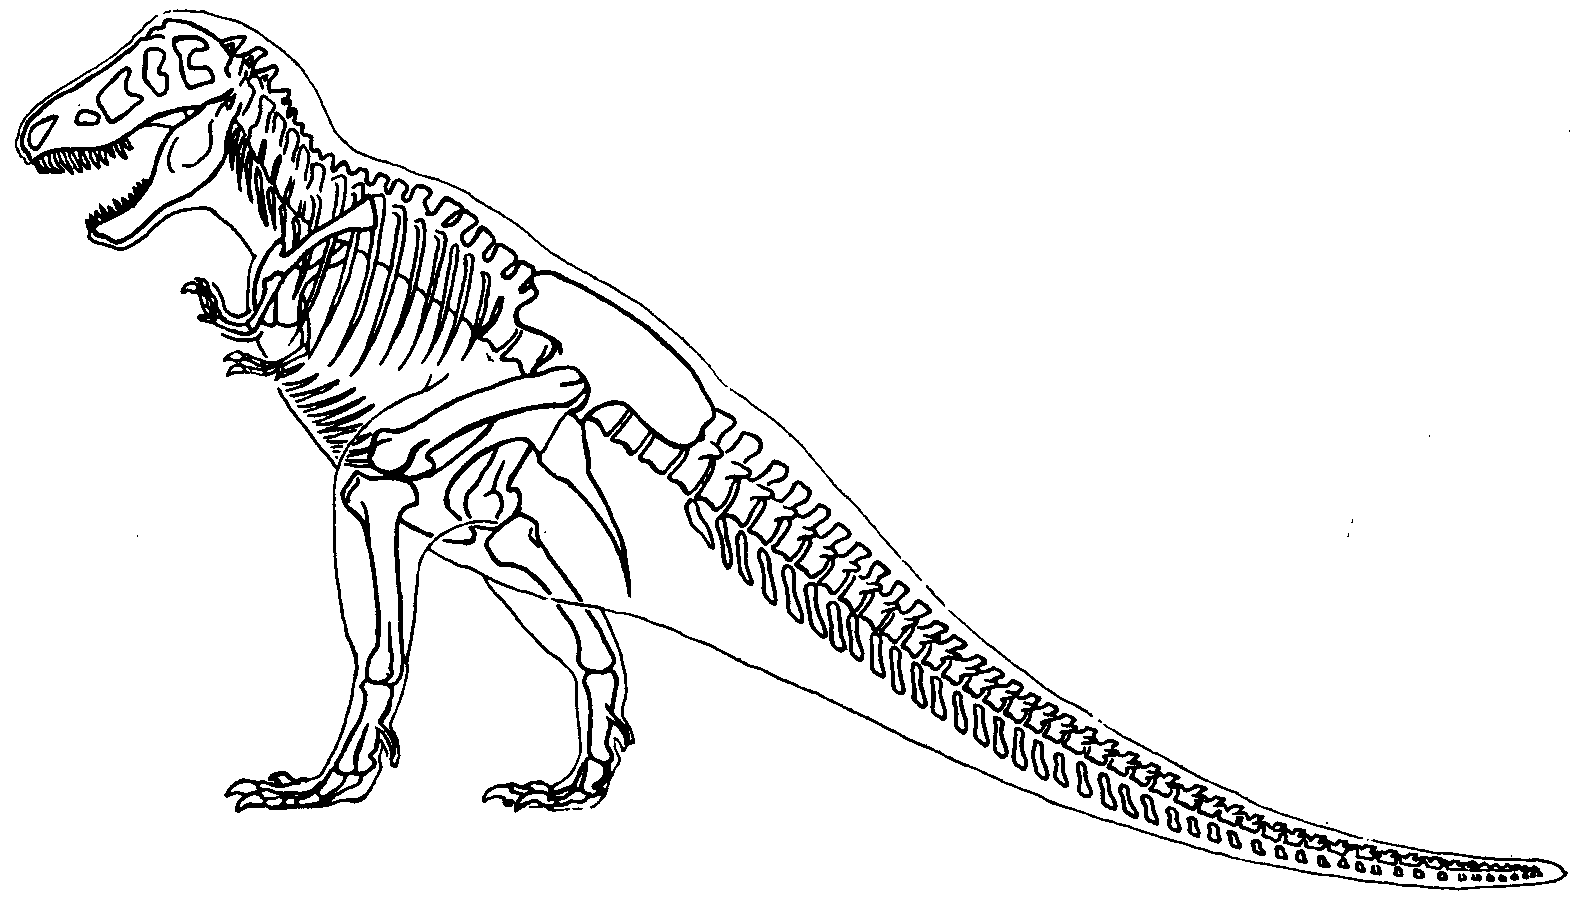 Skeleton T-Rex Coloring Page - Free Printable Coloring Pages for Kids